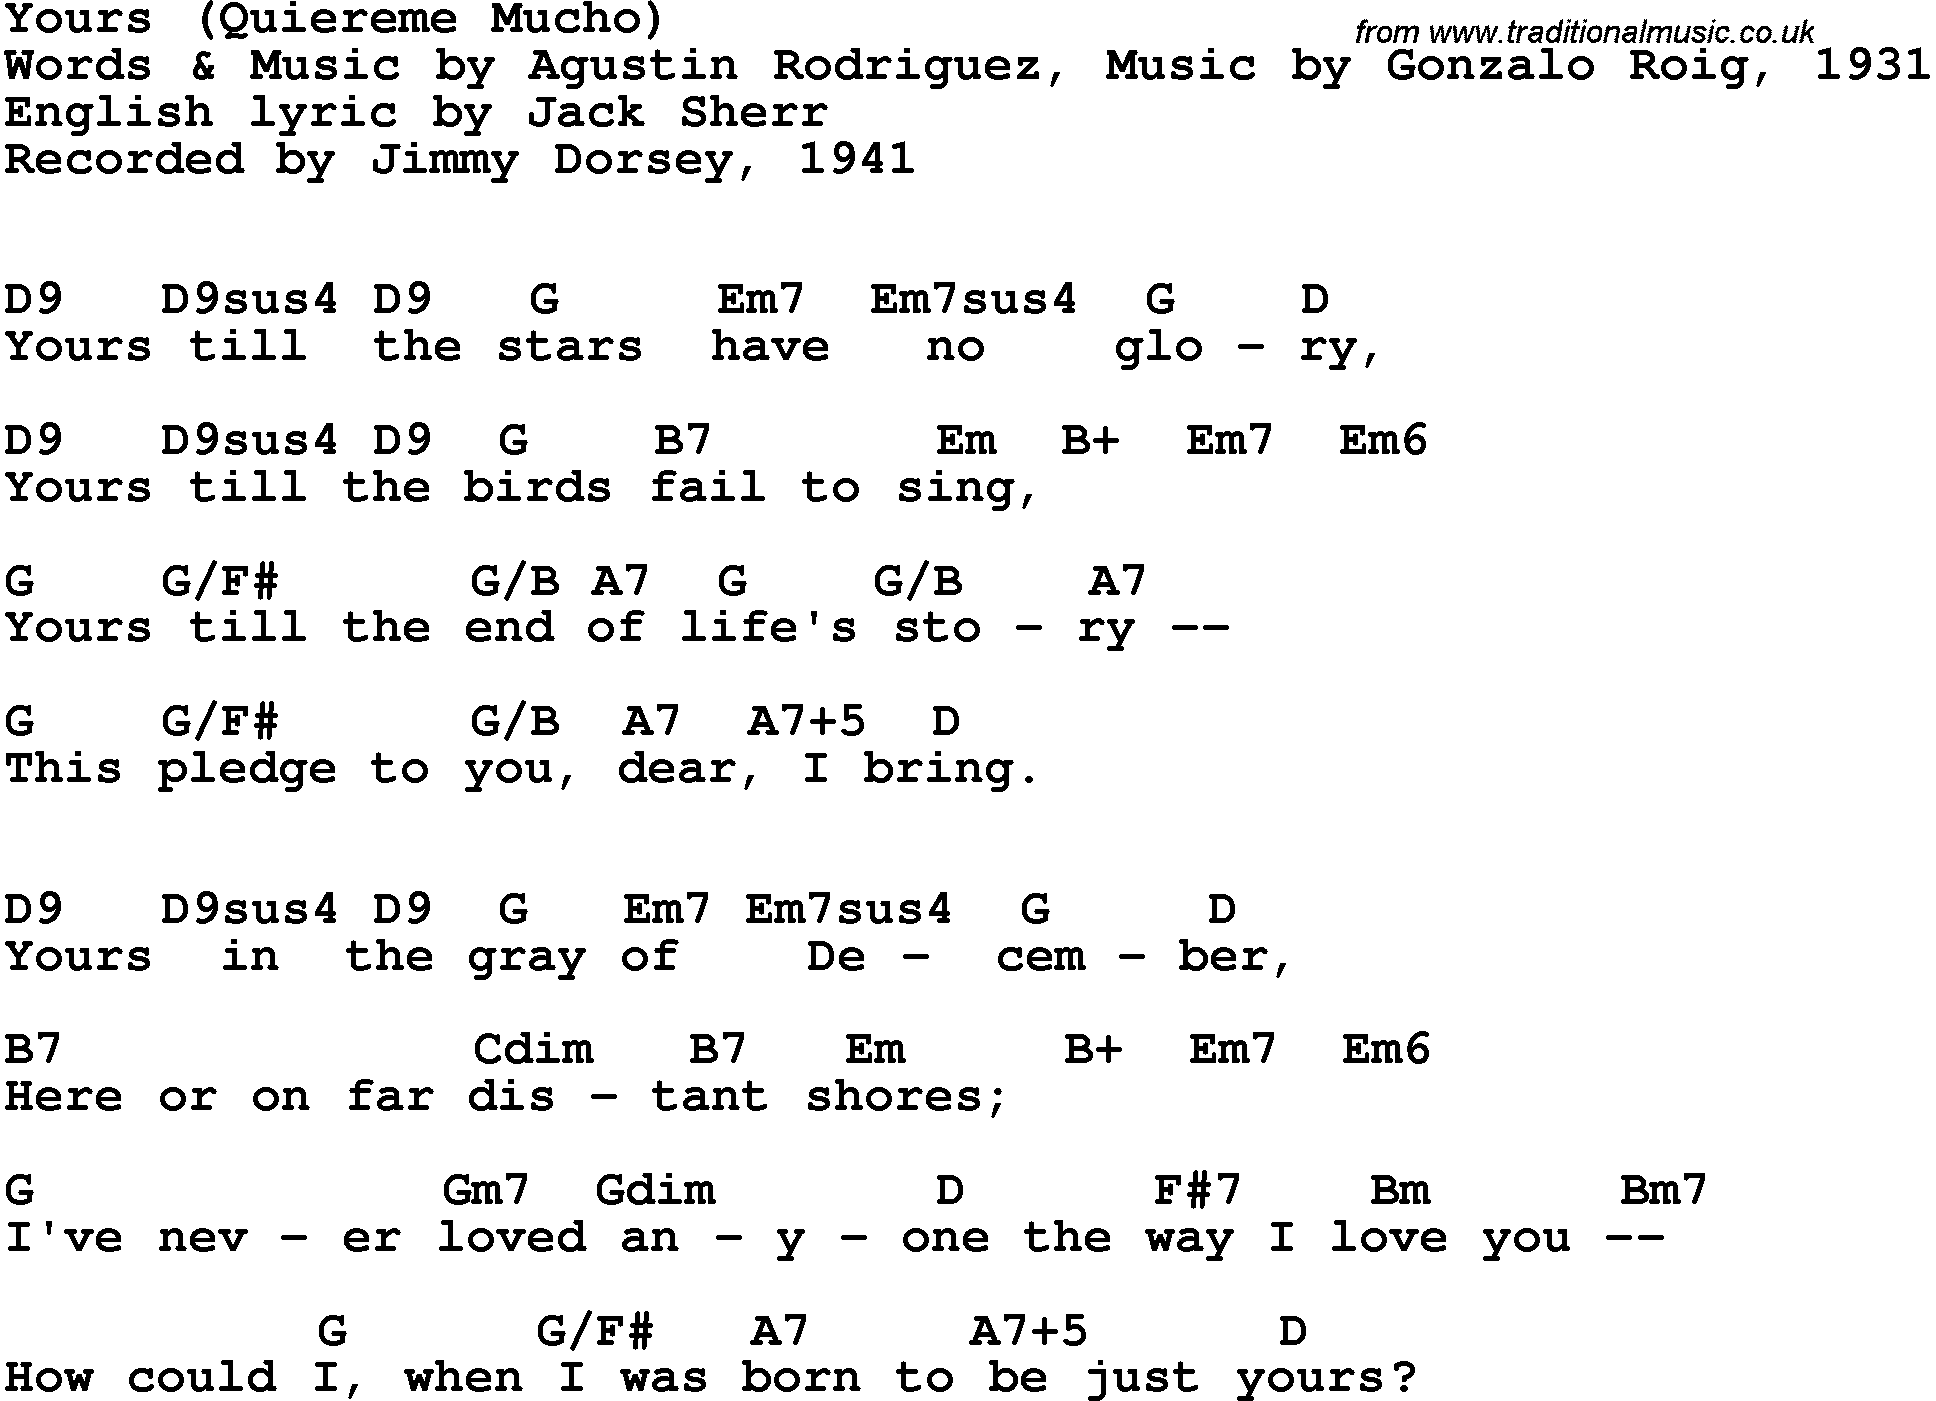 Song Lyrics with guitar chords for Yours (Quireme Mucho) - Jimmy Dorsey, 1941